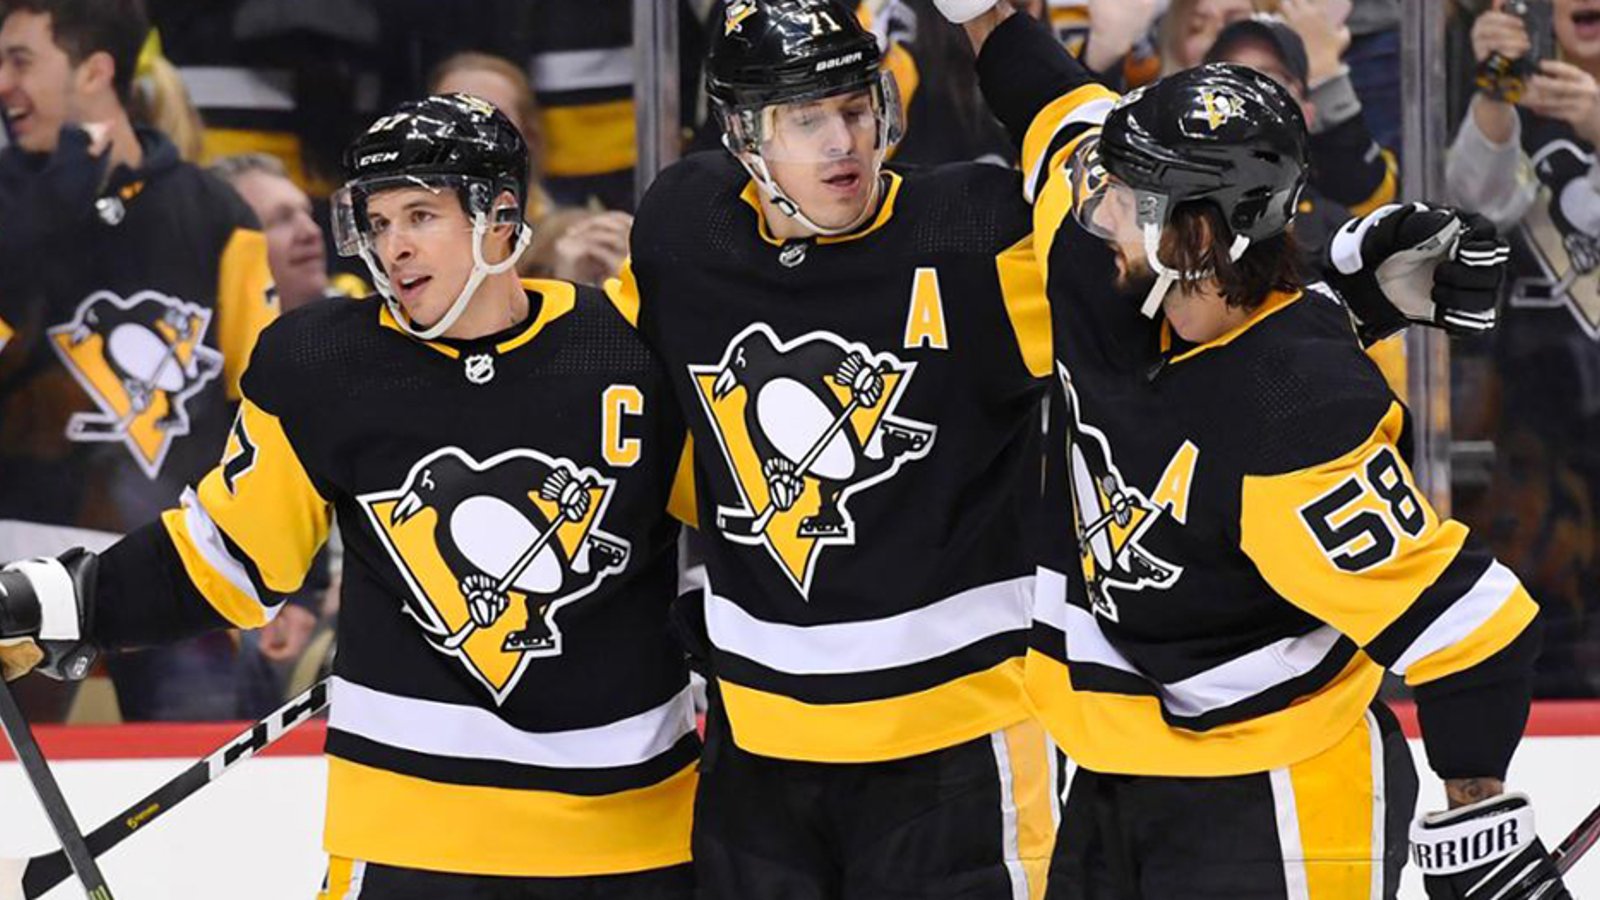 Penguins GM Ron Hextall discusses Crosby, Malkin, and future of the team 